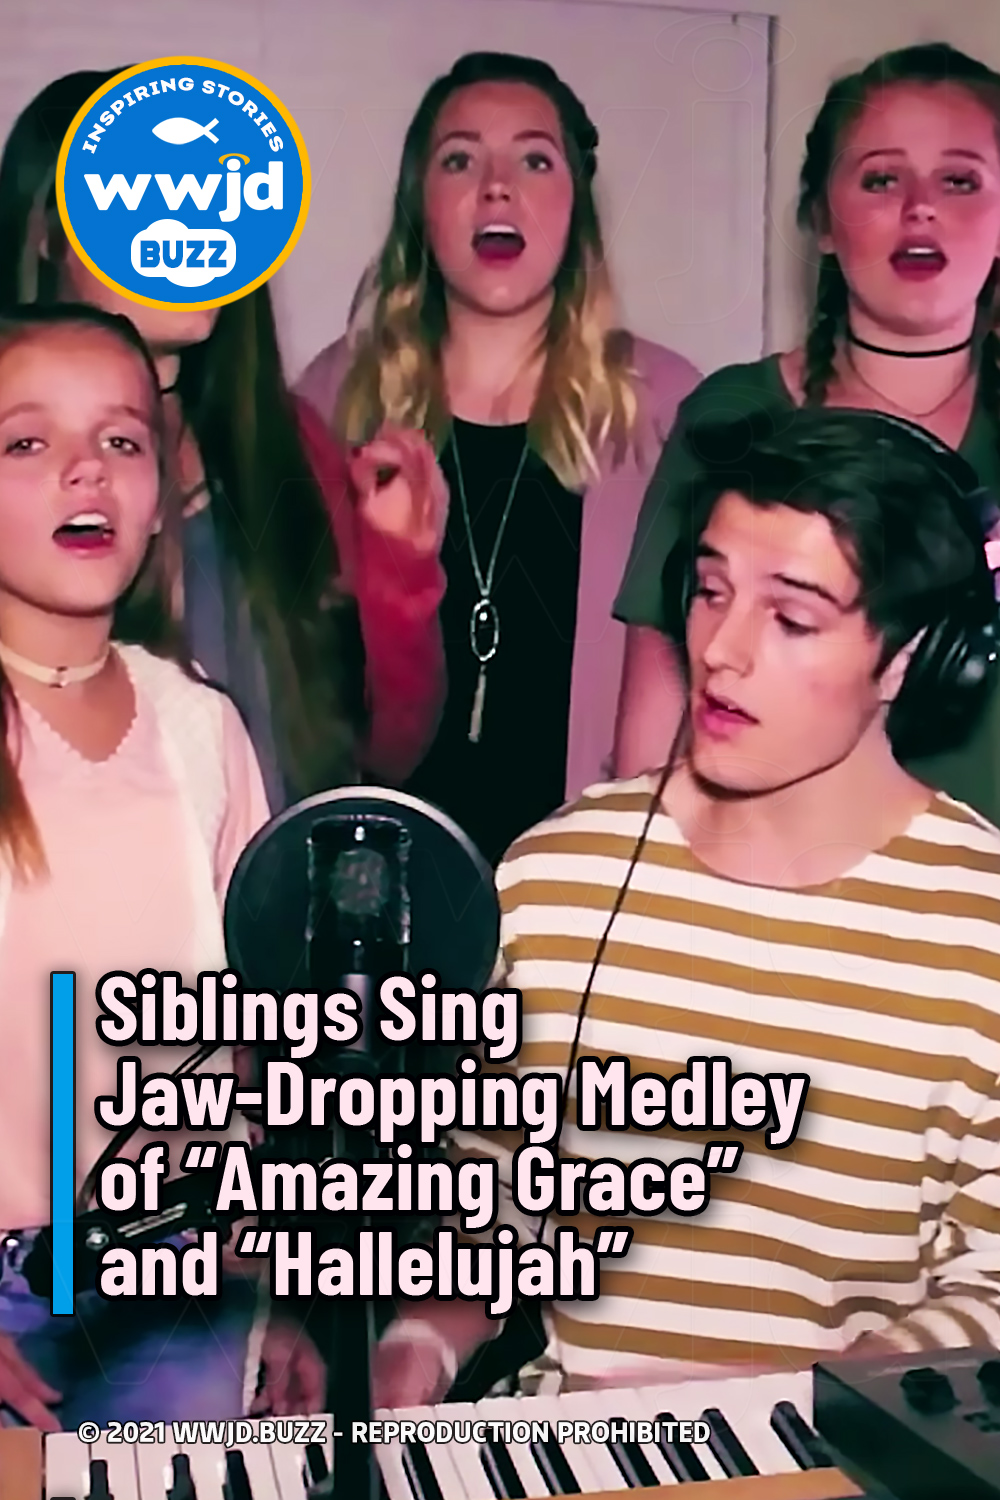 Siblings Sing Jaw-Dropping Medley of “Amazing Grace” and “Hallelujah”